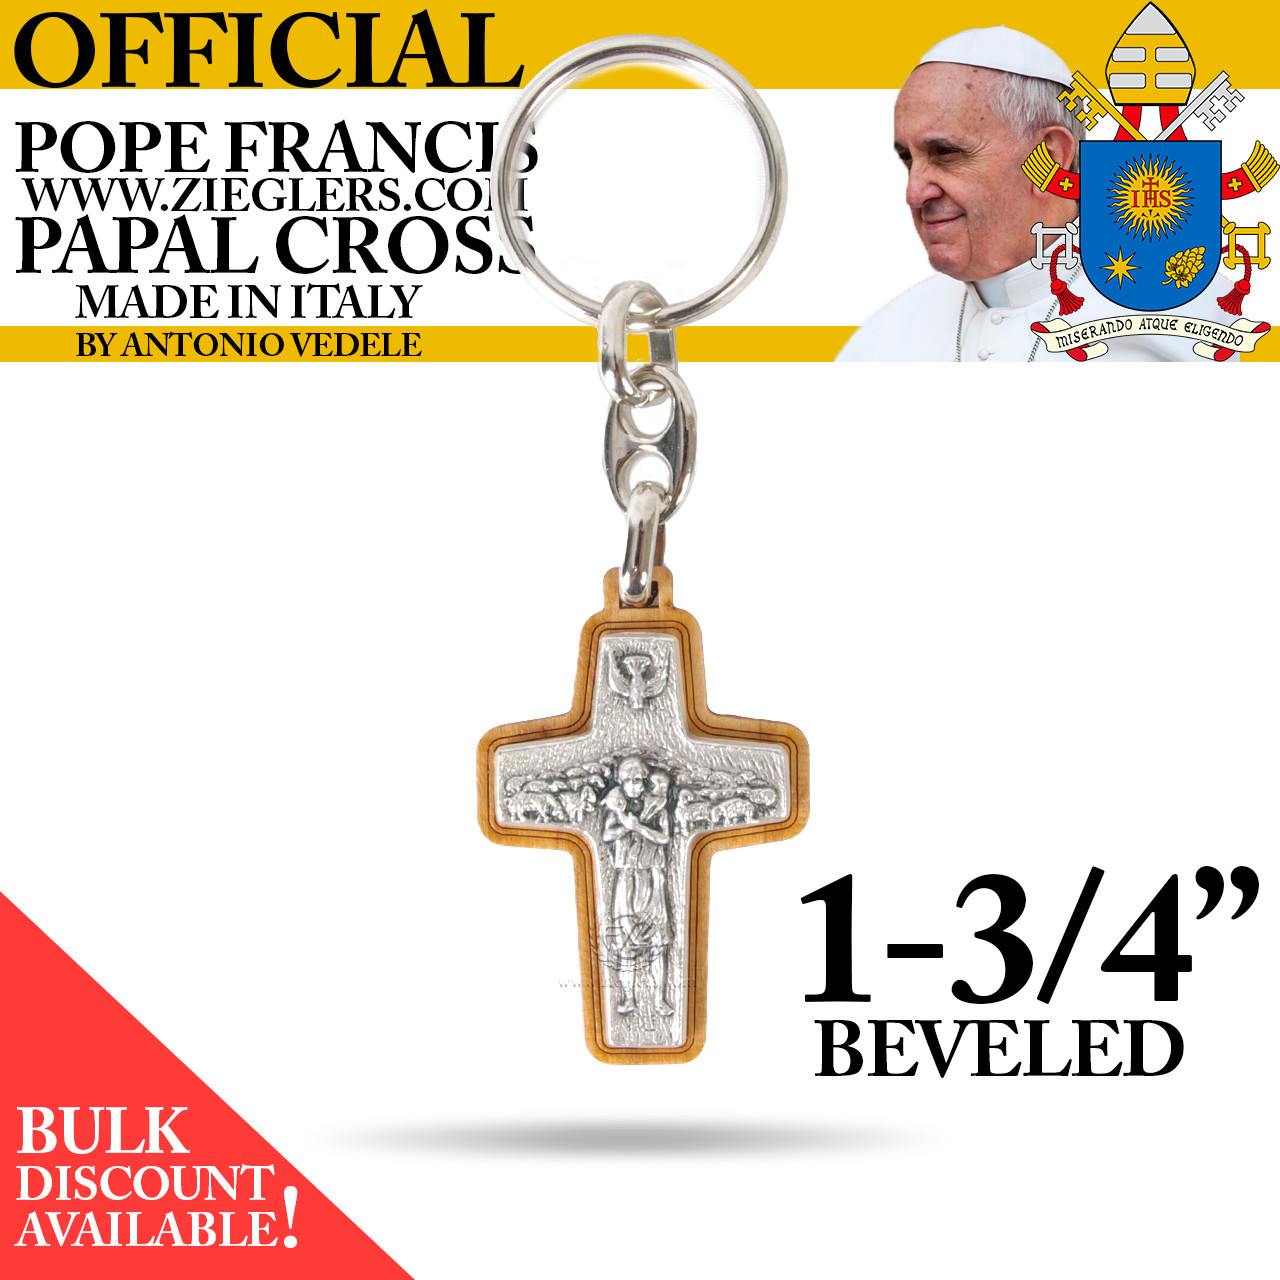 Official Pope Francis Papal Cross Beveled Keychain 1 3 4 inch made of Olive Wood and metal with image of Holy Spirit dove and good shepherd with sheep made in Italy PC181